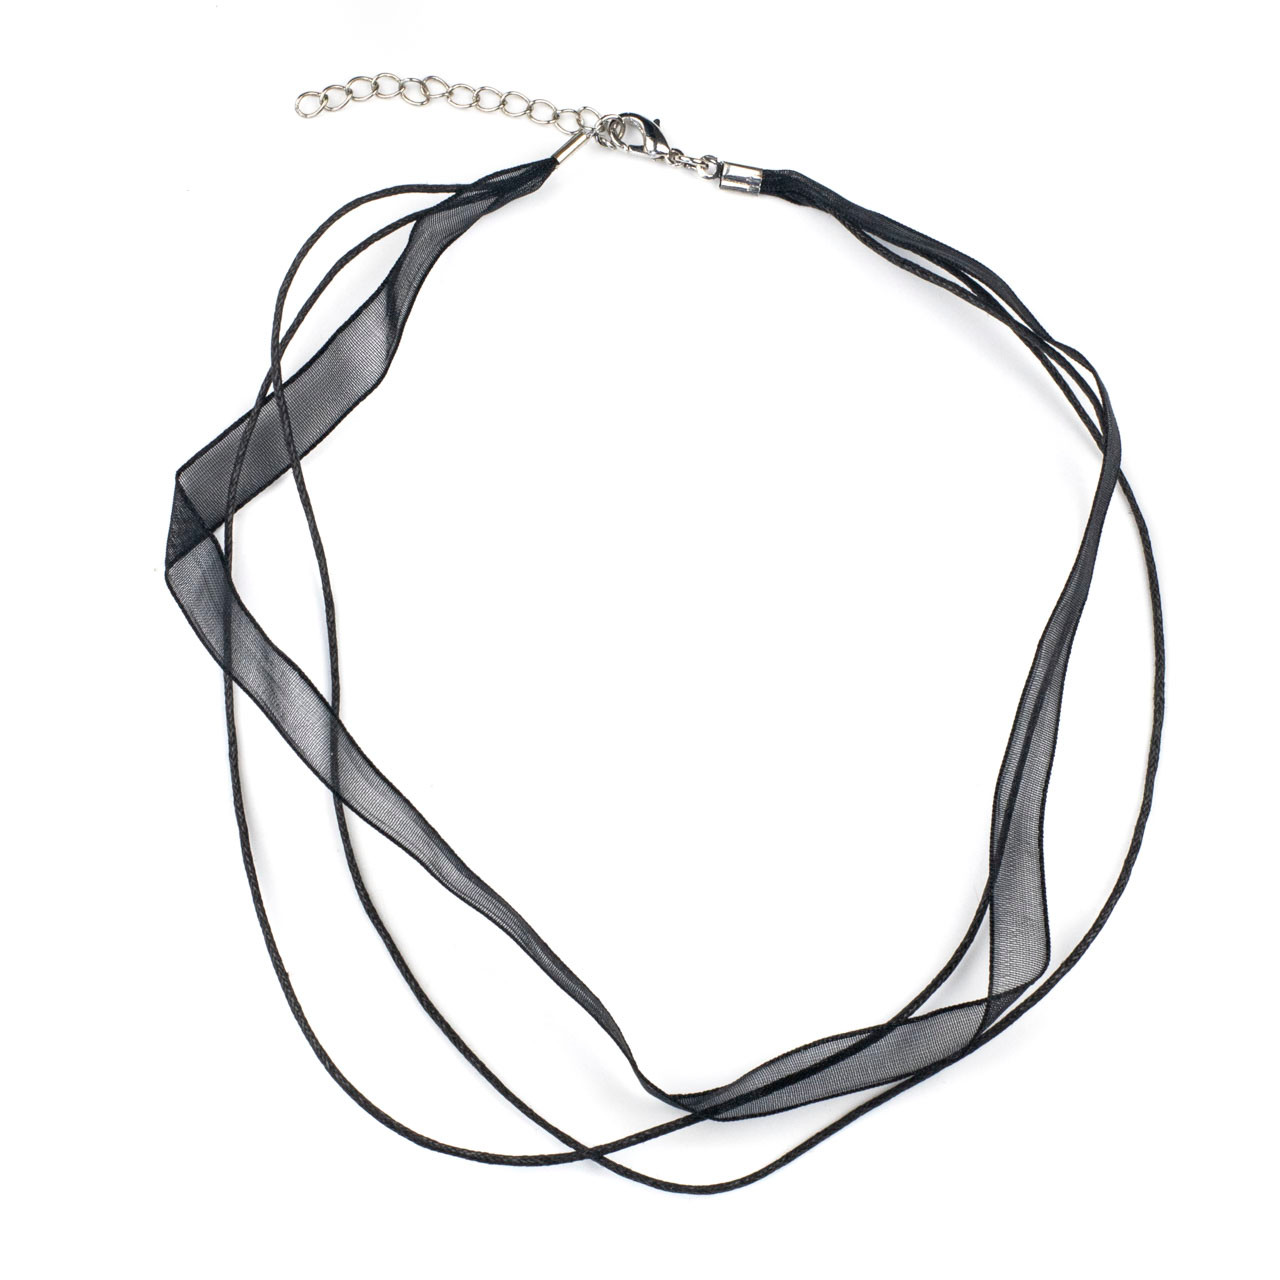 3 Strand Waxed Cord Necklace - Black, 1mm, 16-18 with Silver Plated Copper  Adjustable Clasp